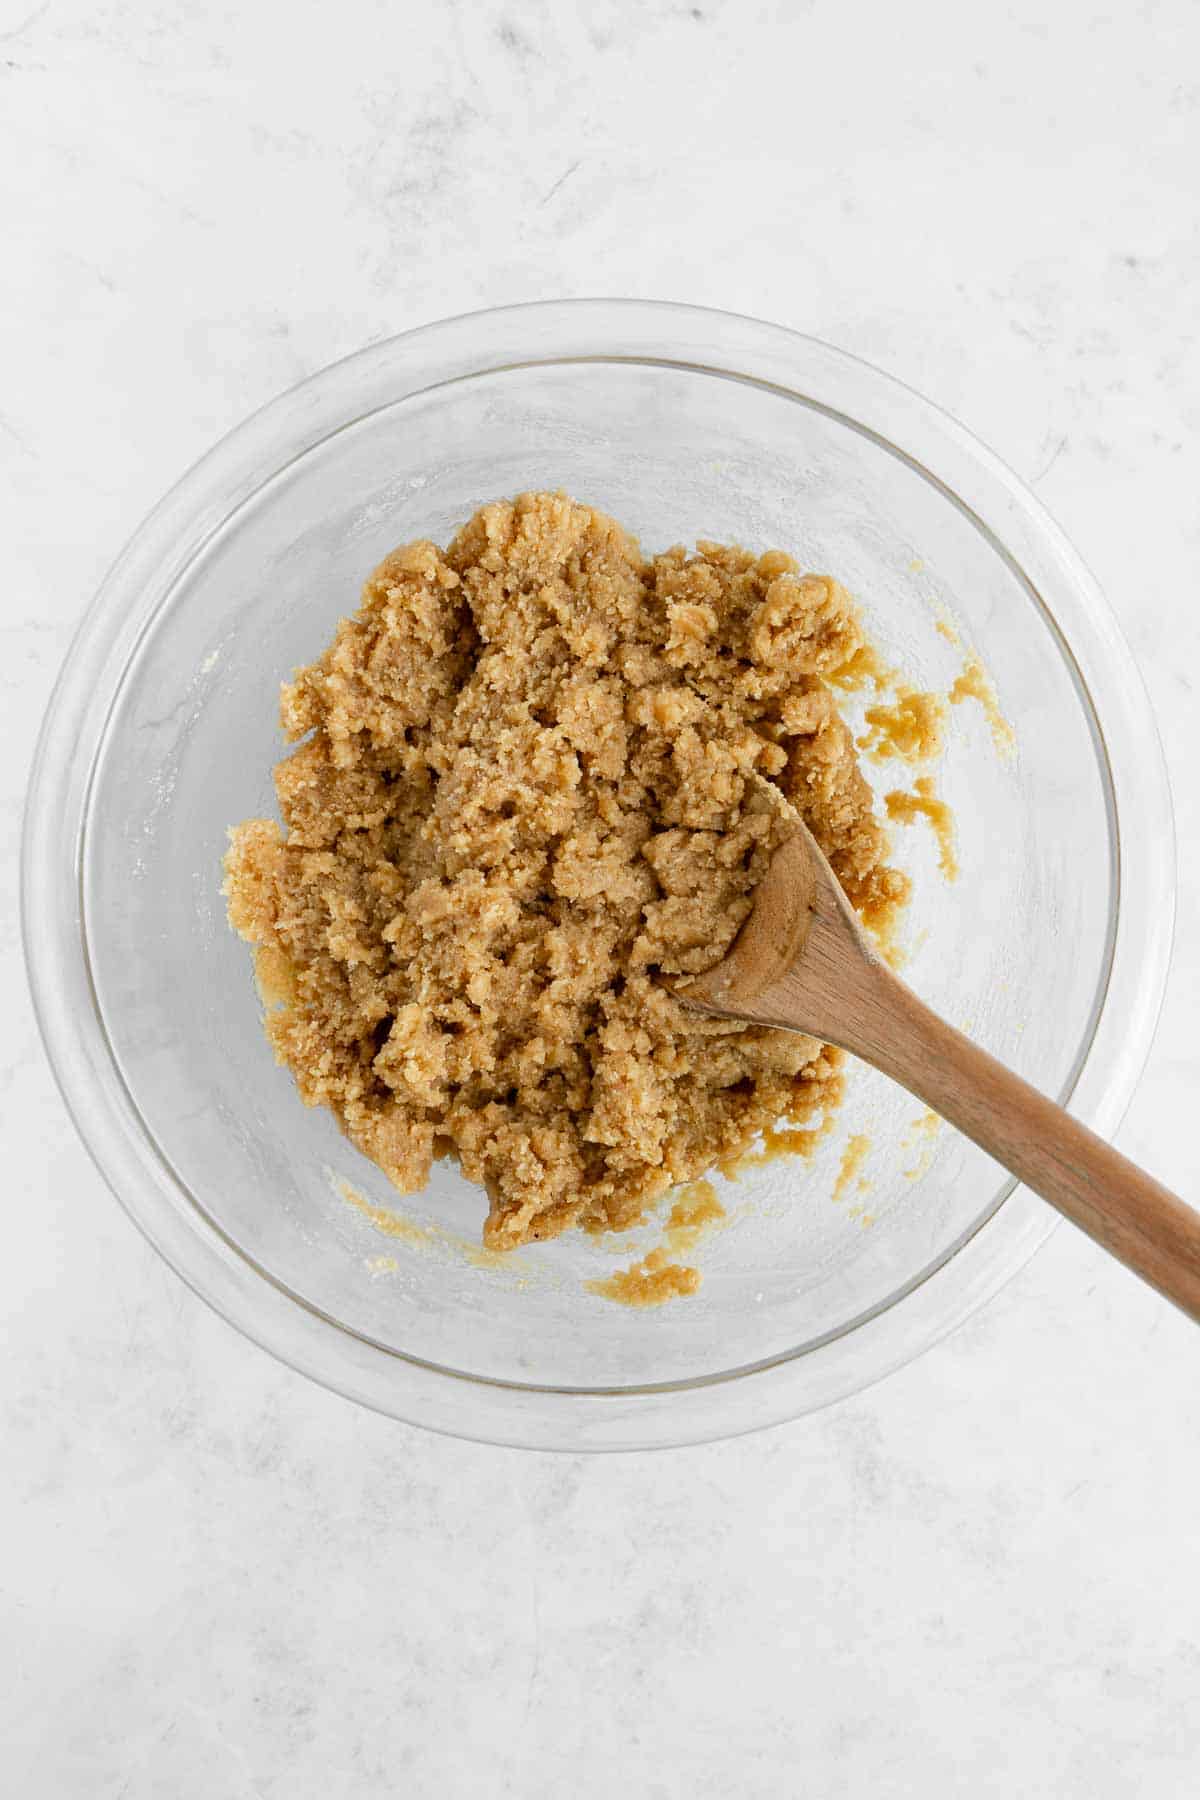 a wood spoon mixing healthy edible cookie dough in a glass bowl